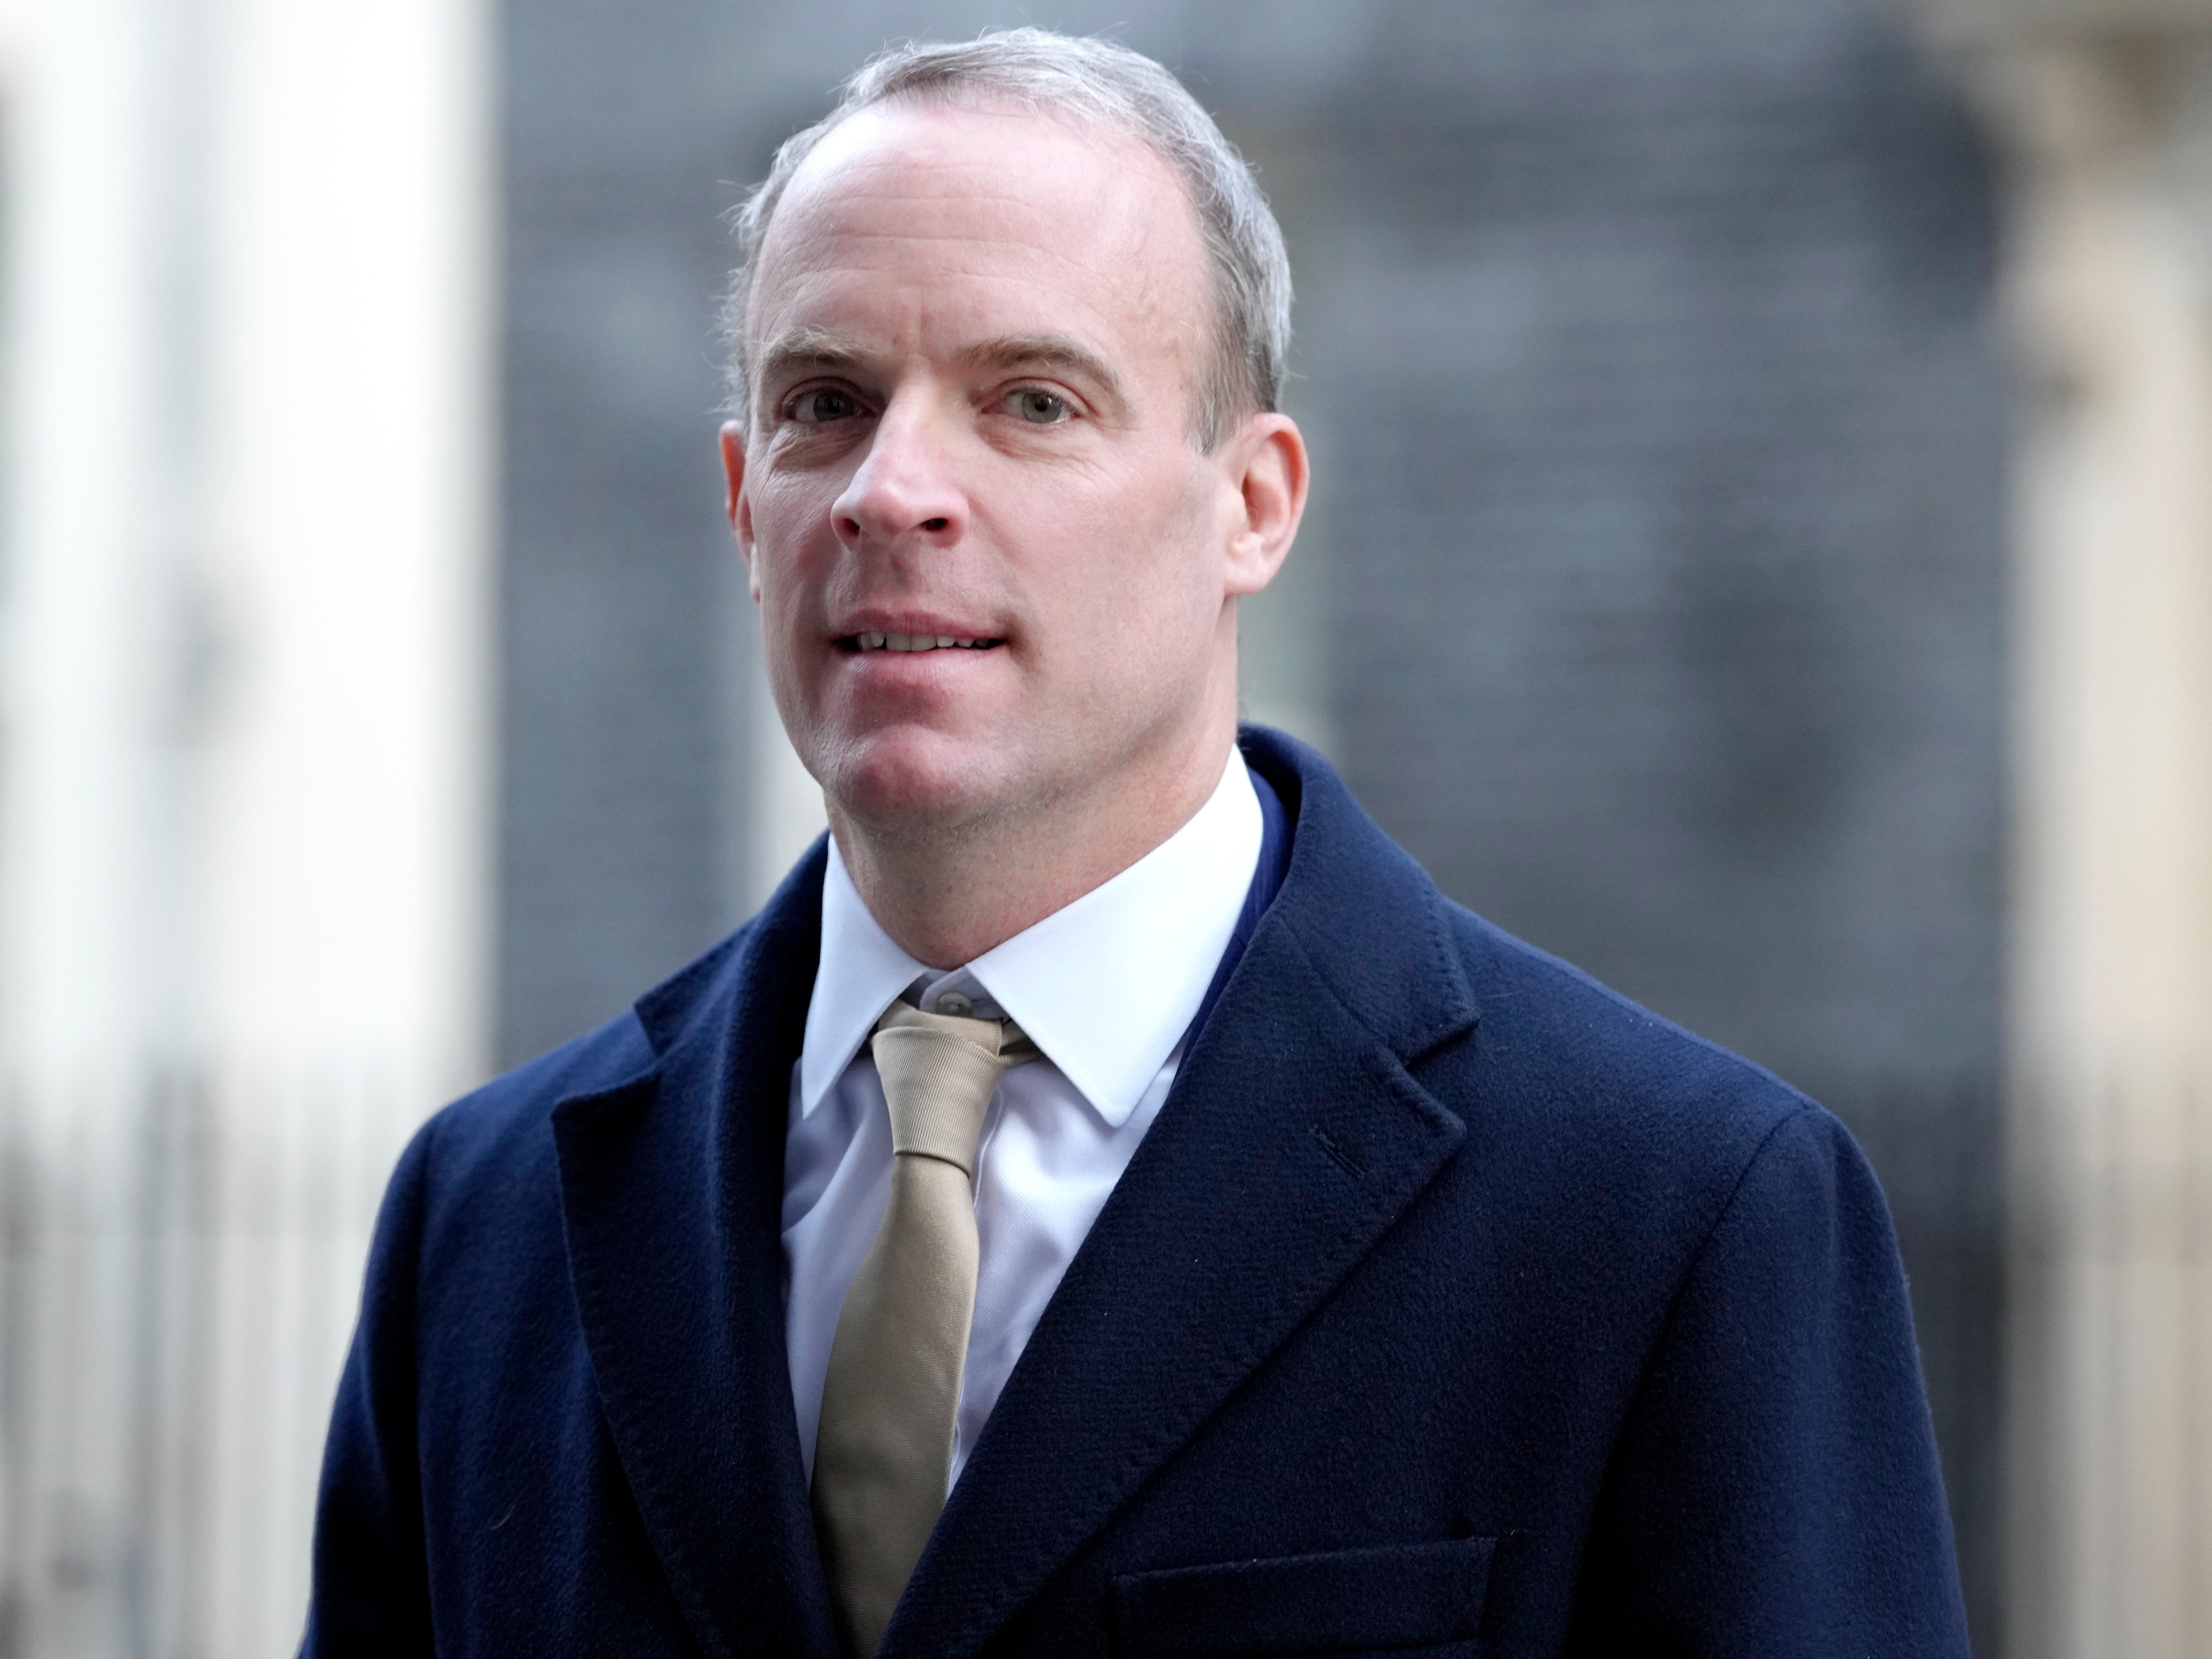 It’s no wonder the Joint Committee on Human Rights wants to stop Raab’s bill in its tracks